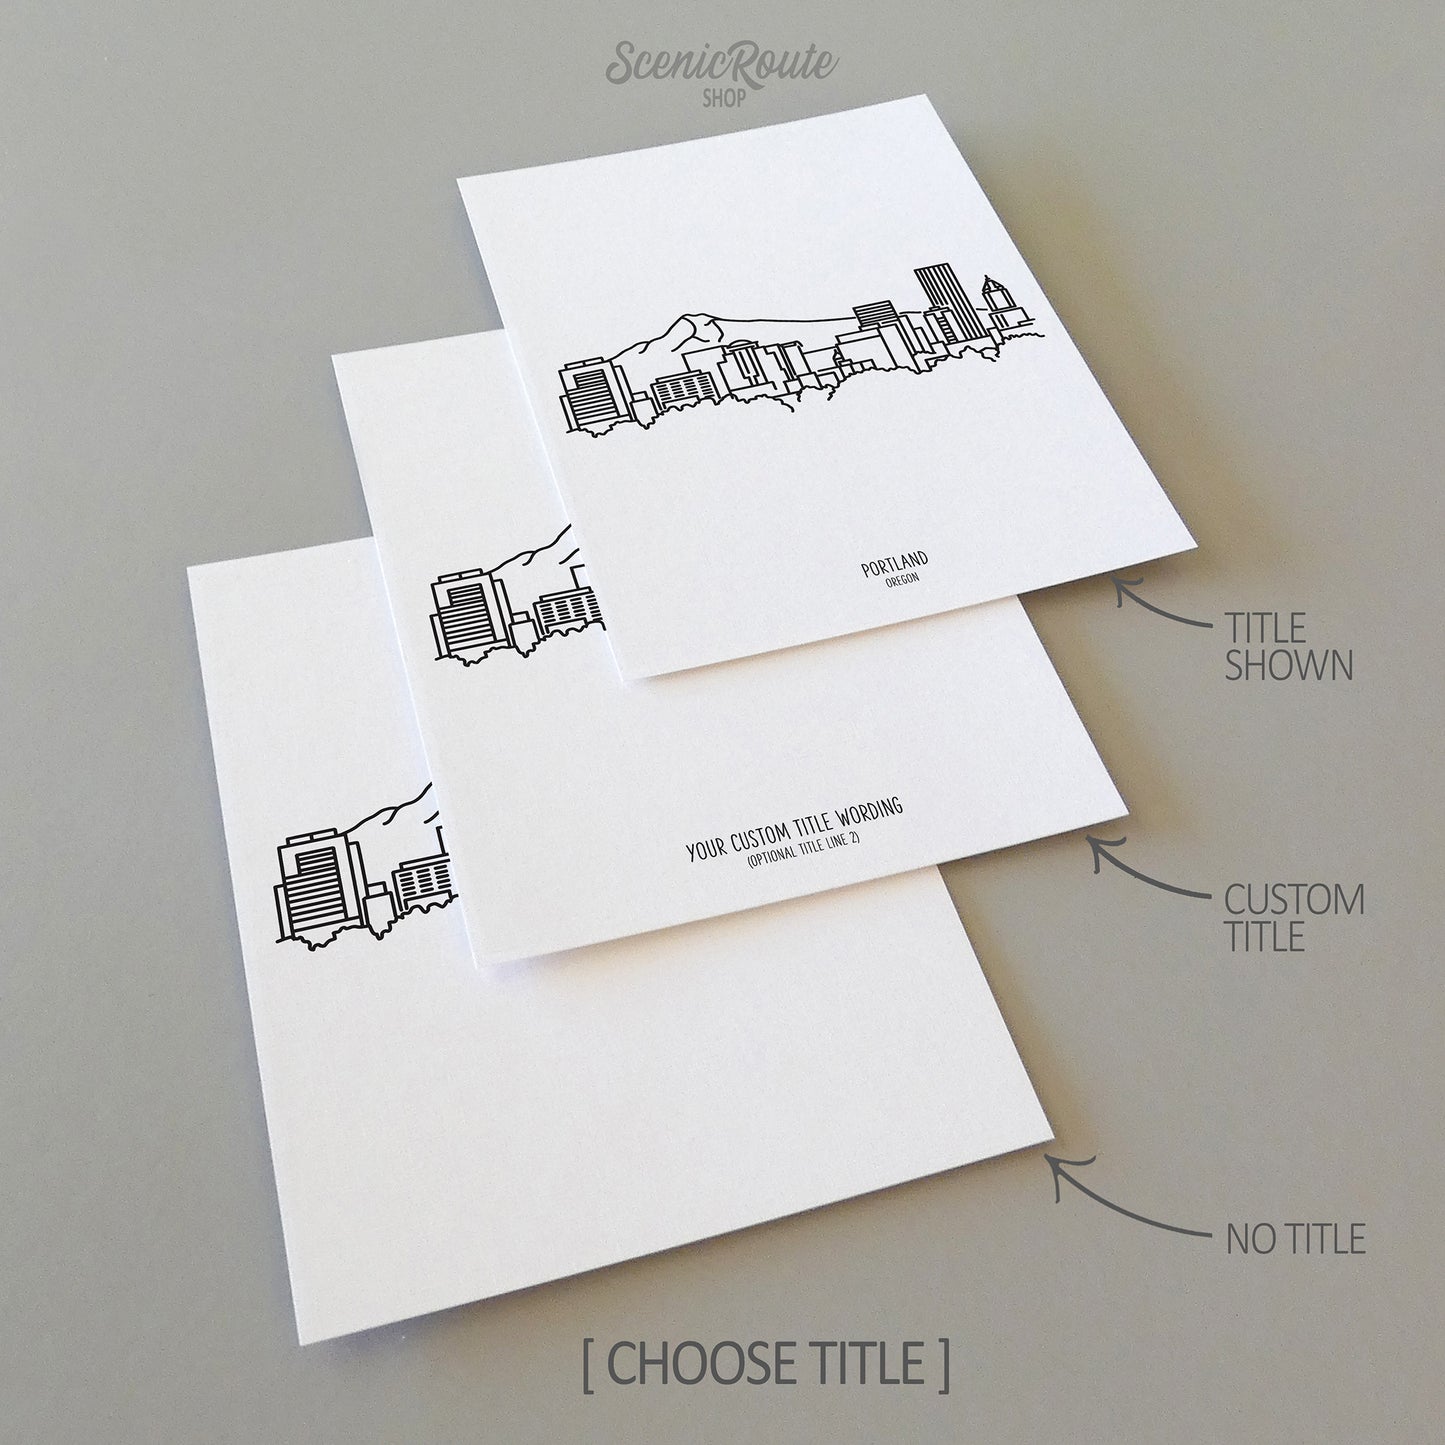 Three line art drawings of the Portland Oregon Skyline on white linen paper with a gray background. The pieces are shown with title options that can be chosen and personalized.